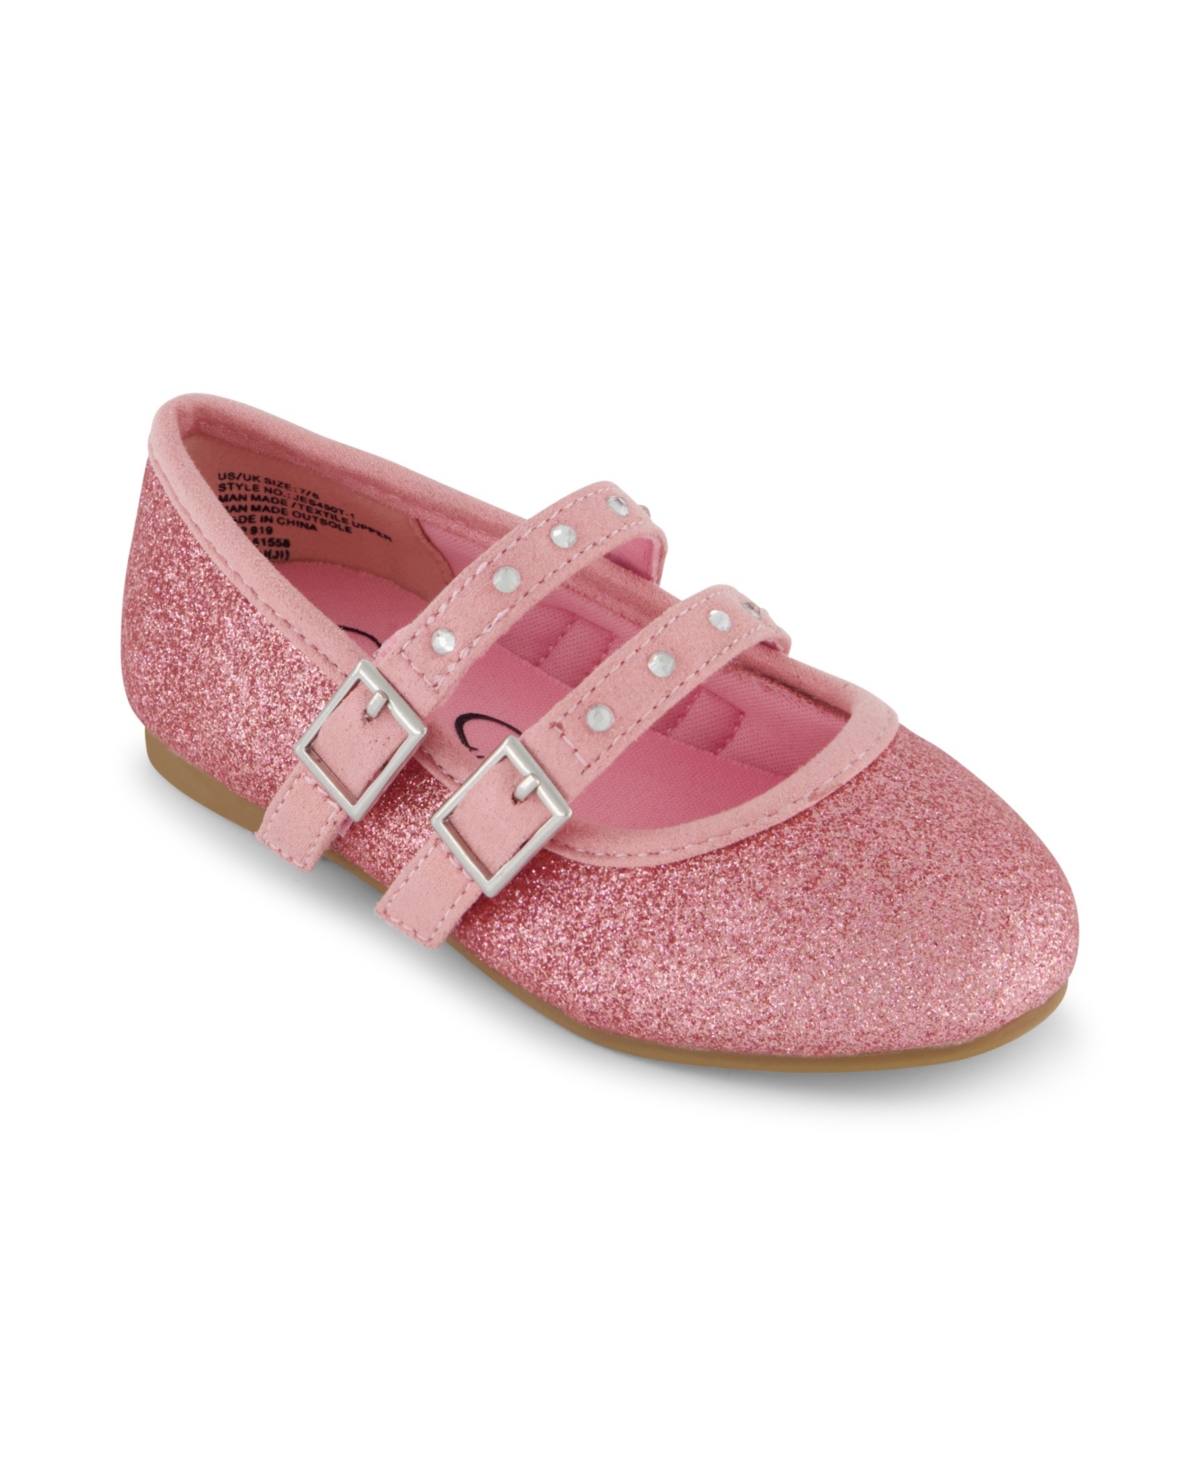 Jessica Simpson Toddler Girls Mary Jane Ballet Flat Shoes In Pink